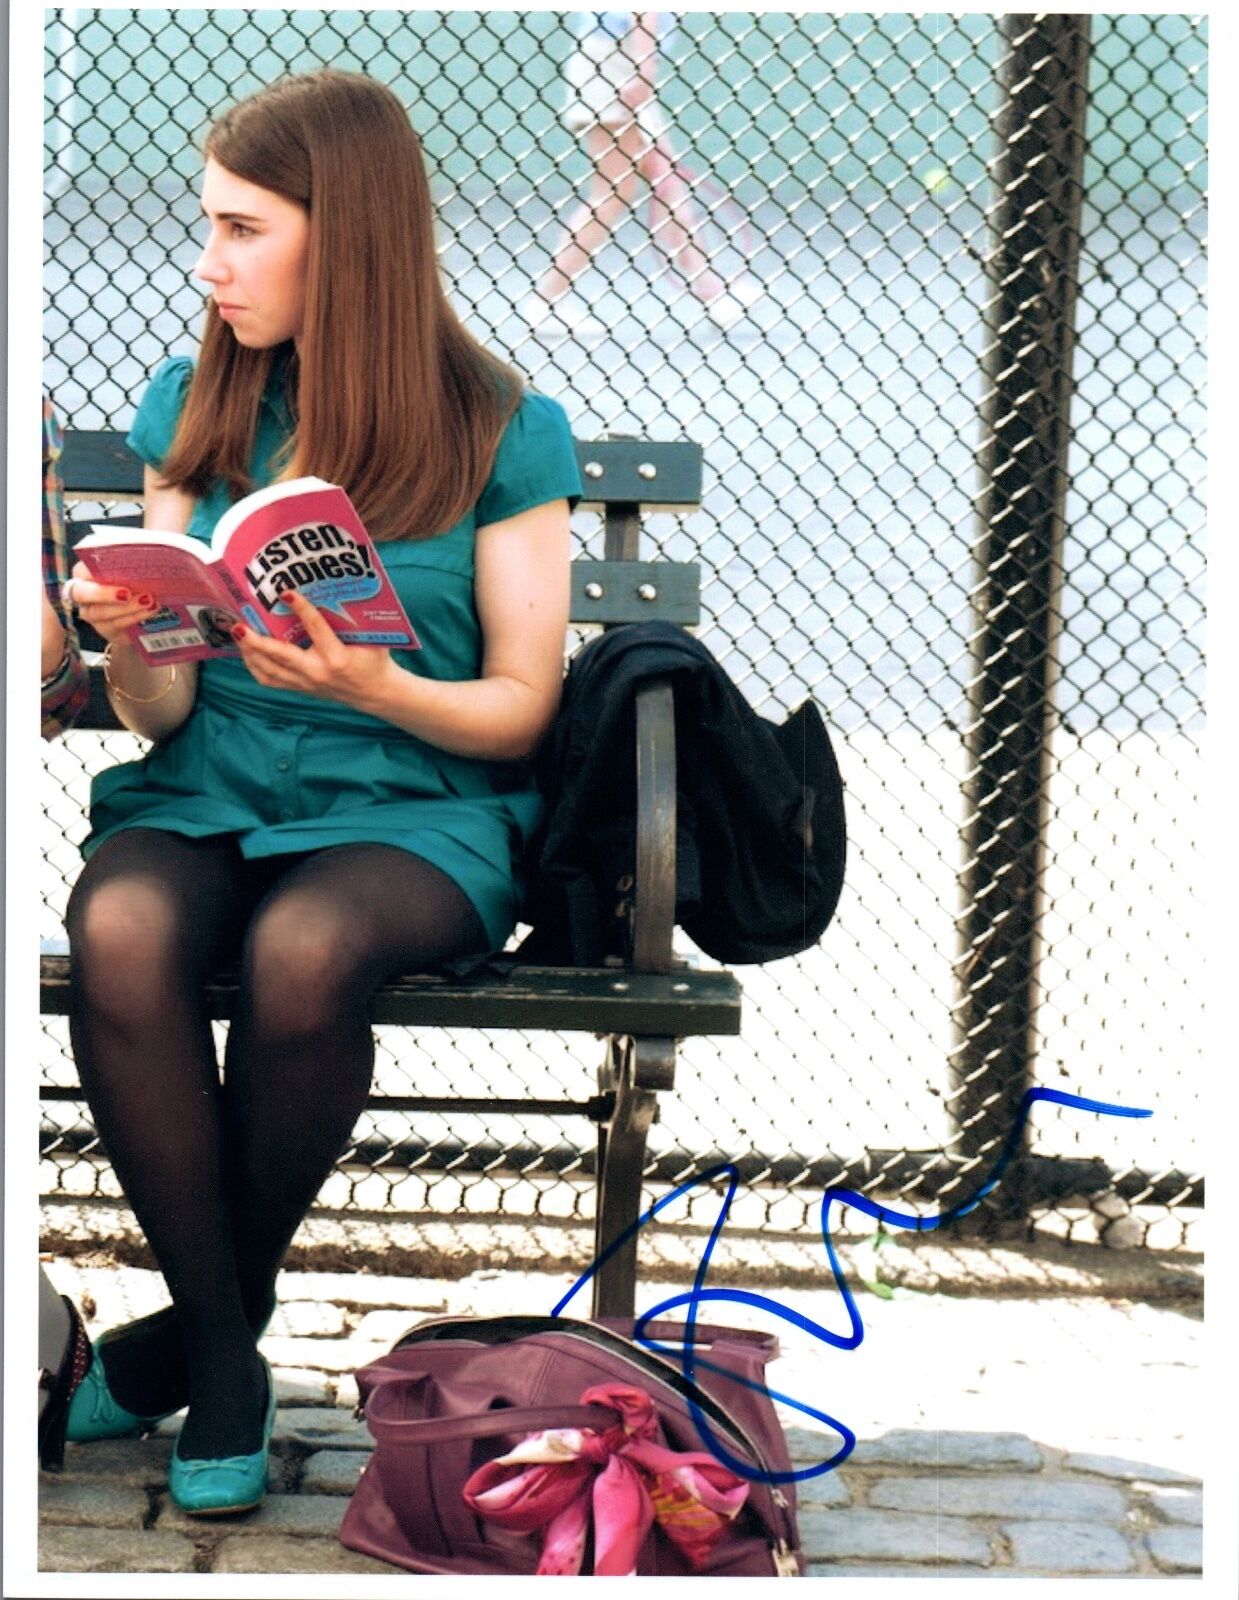 Zosia Mamet Signed Autographed 8x10 Photo Poster painting HBO's Girls COA VD